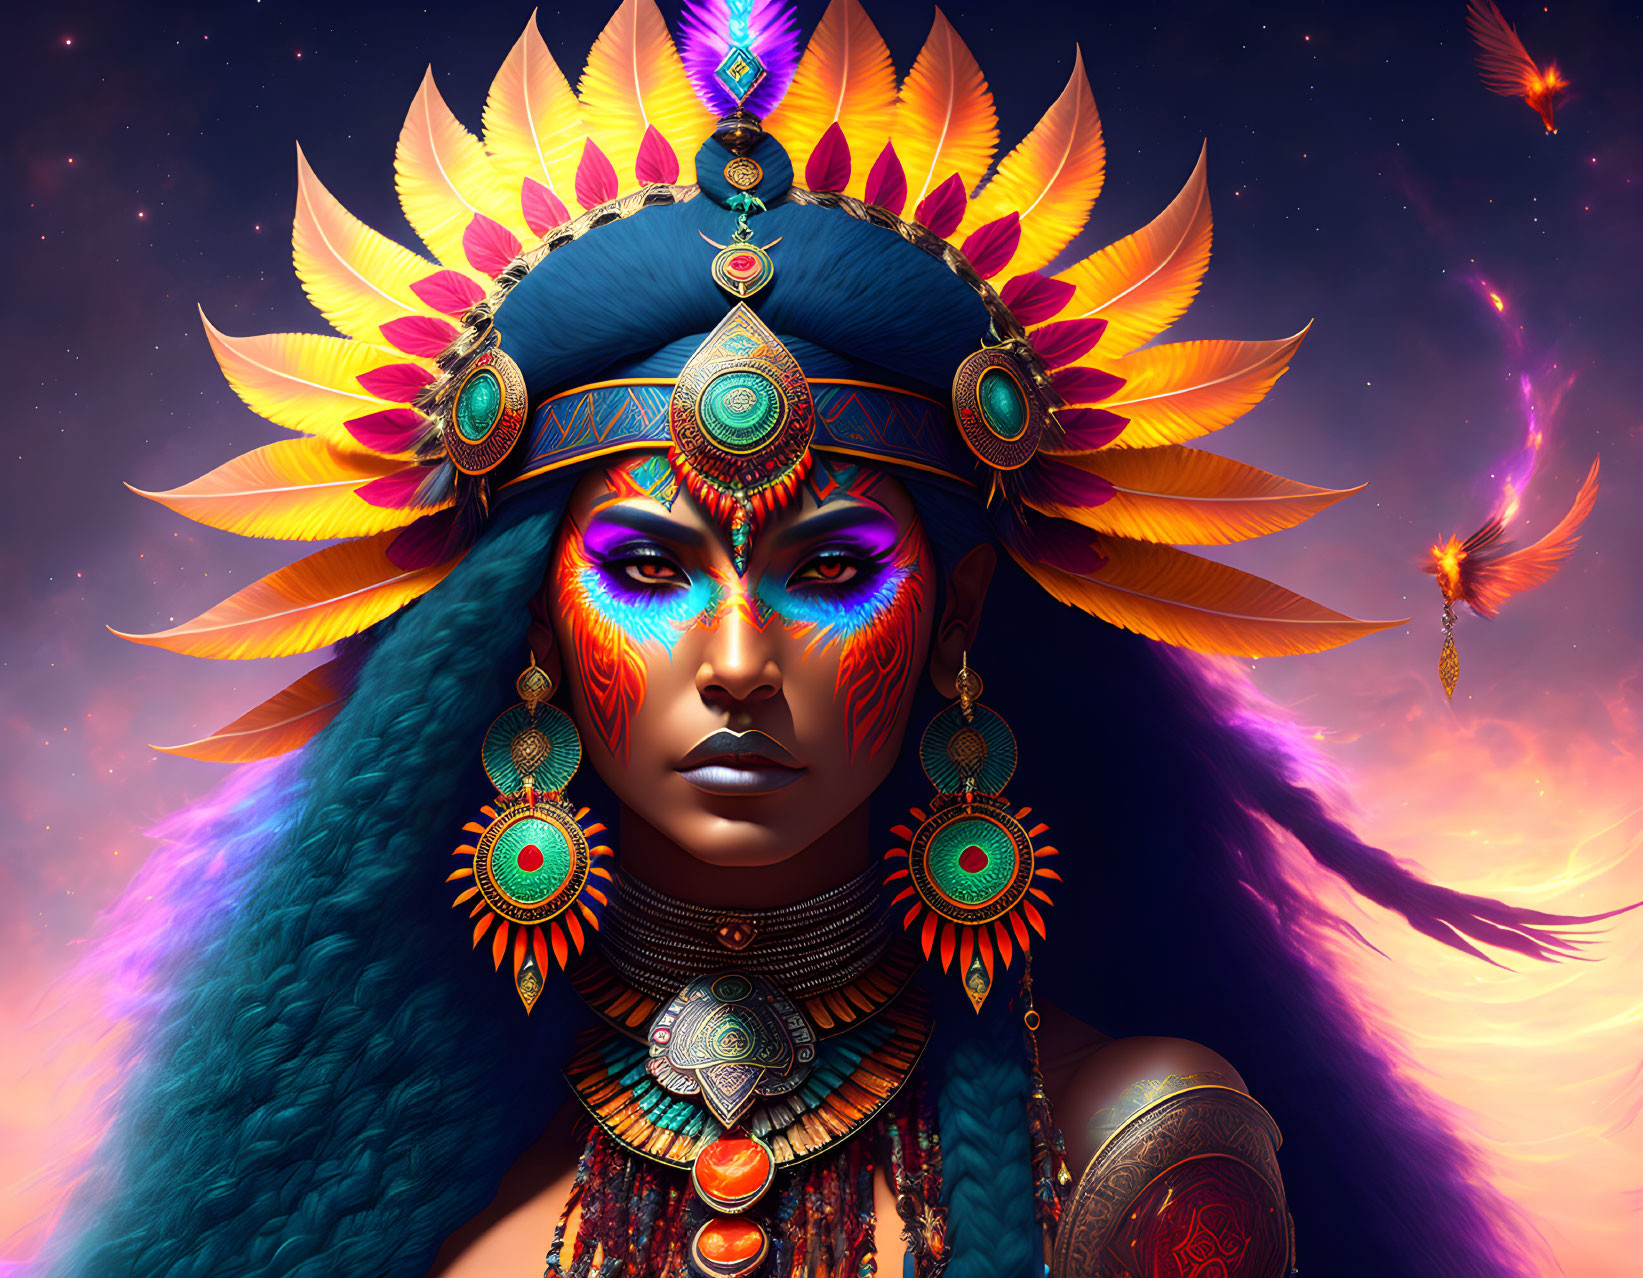 Blue-skinned woman with feathered headdress in cosmic scene